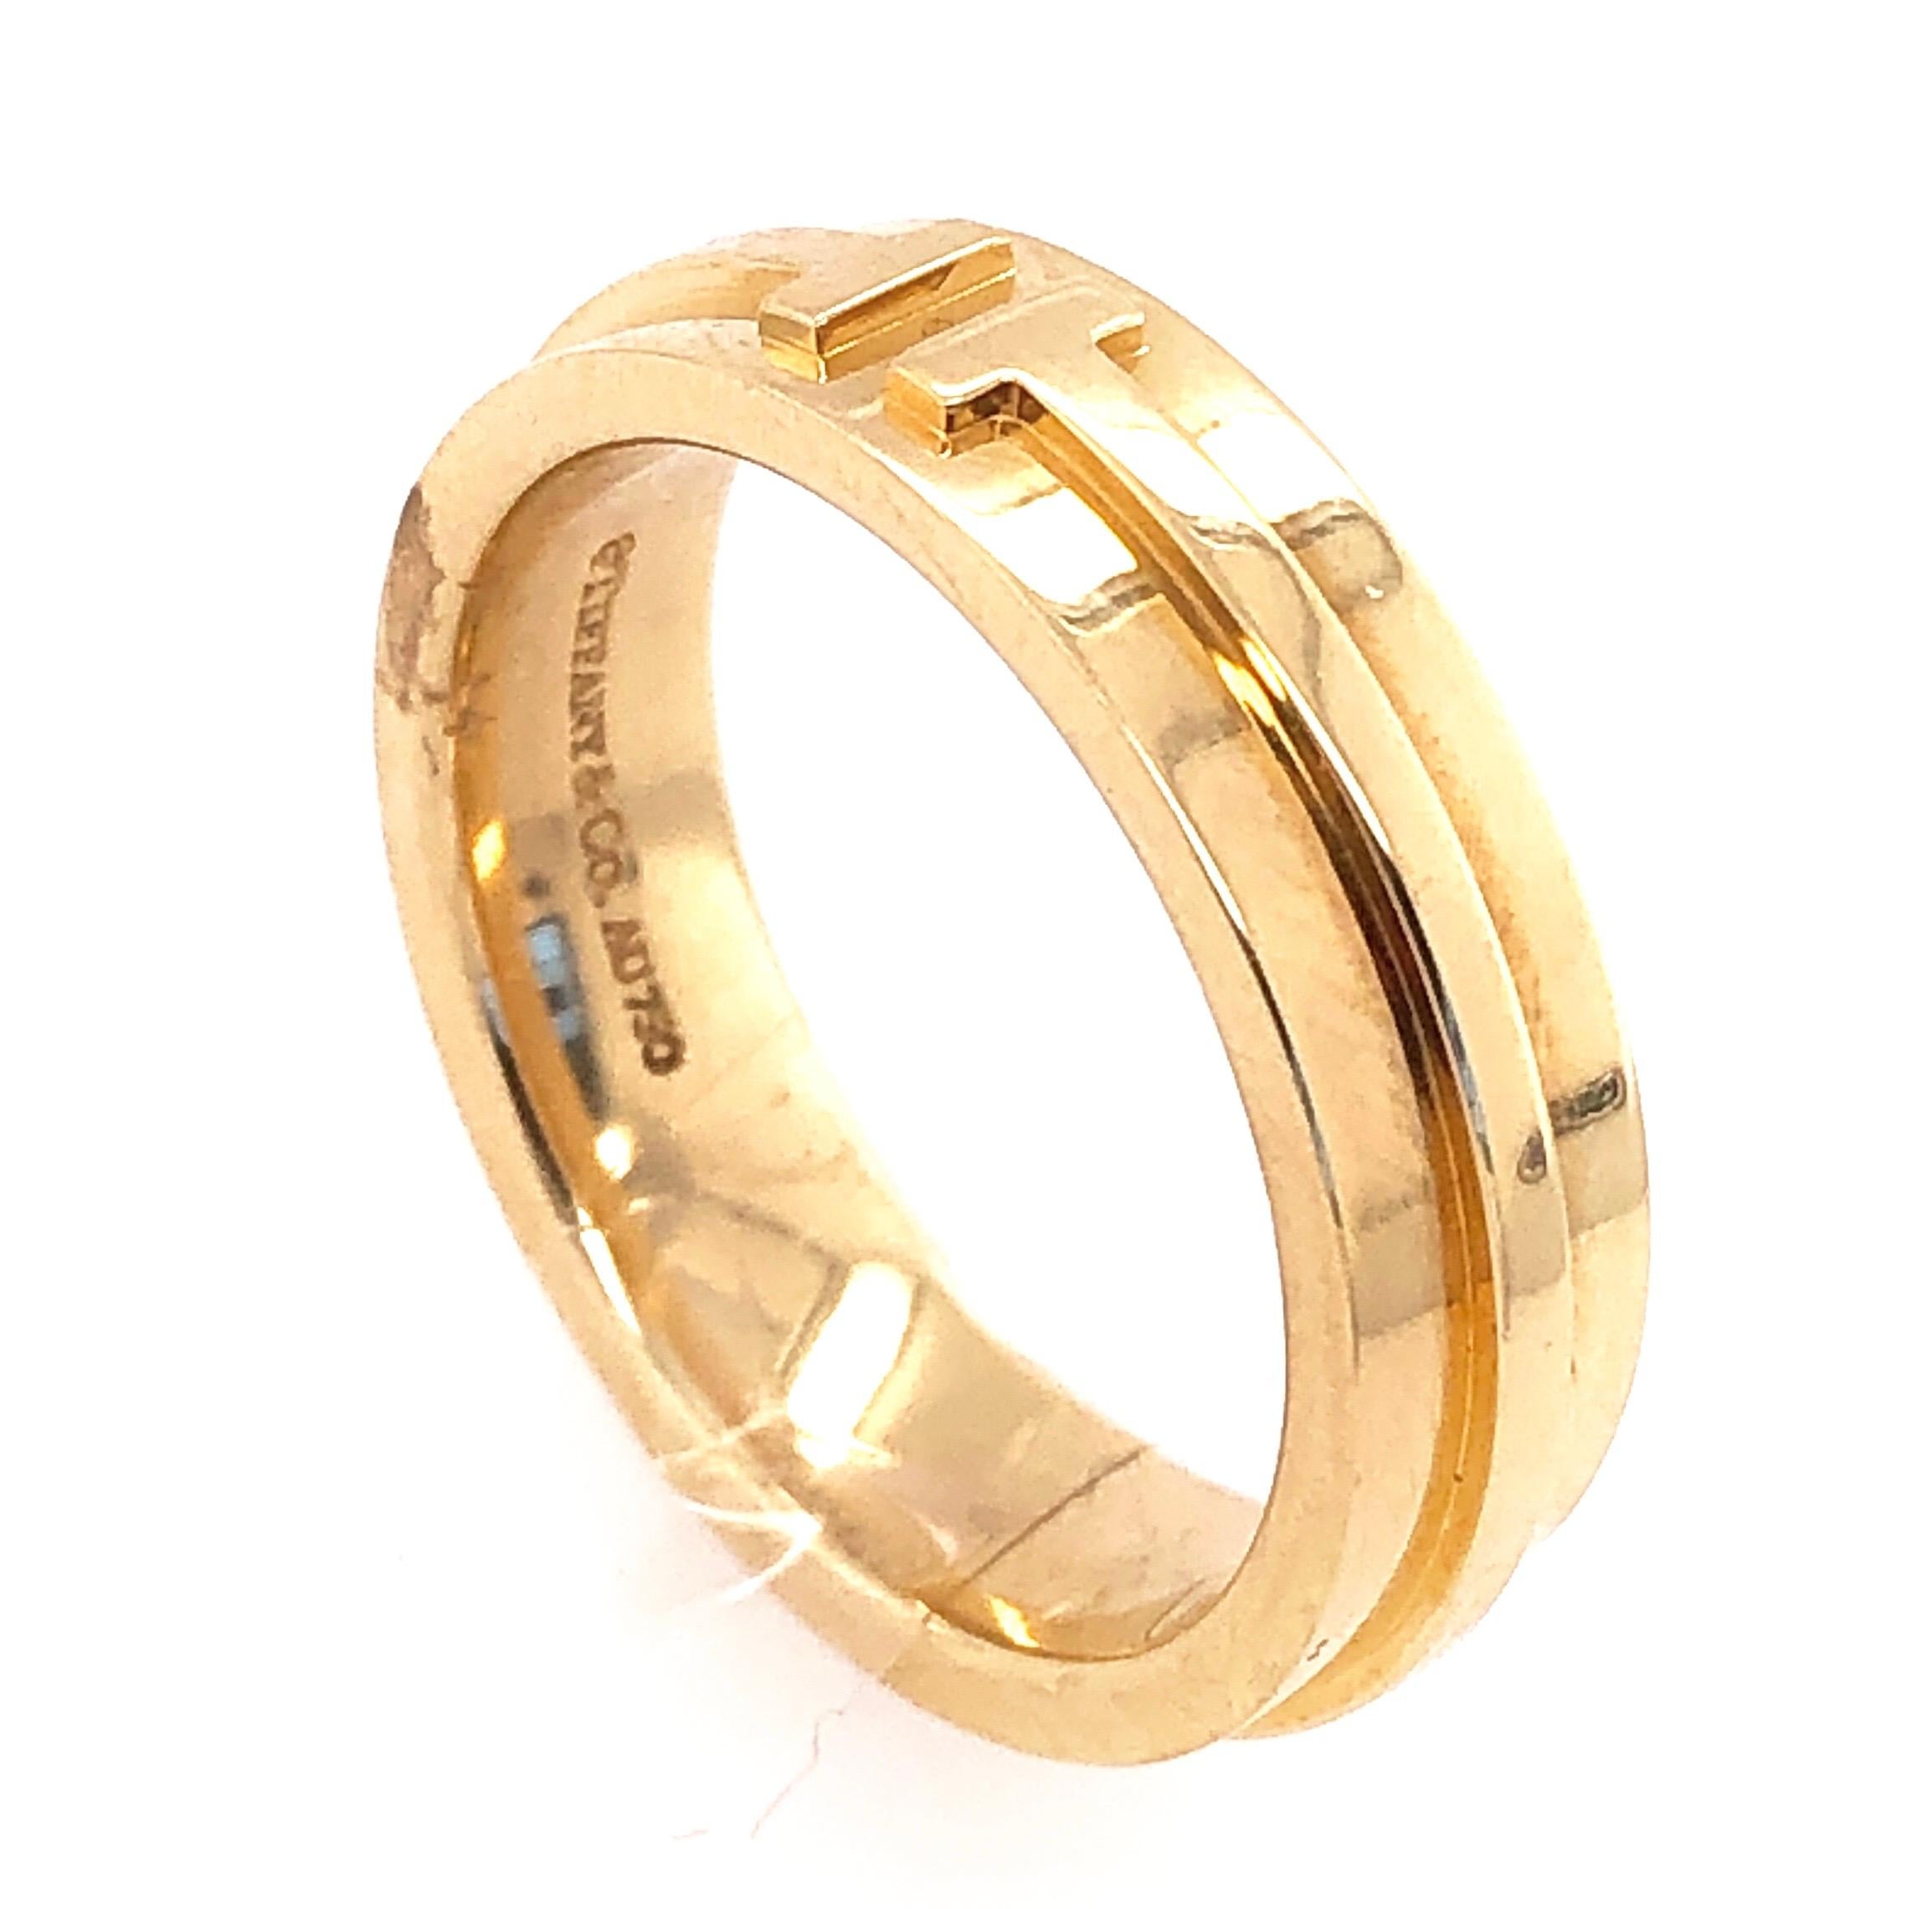 Tiffany & Co. 18Kt Yellow Gold Wedding Ring/Band. Stamped AU750
Size 9 with 11 grams total weight.